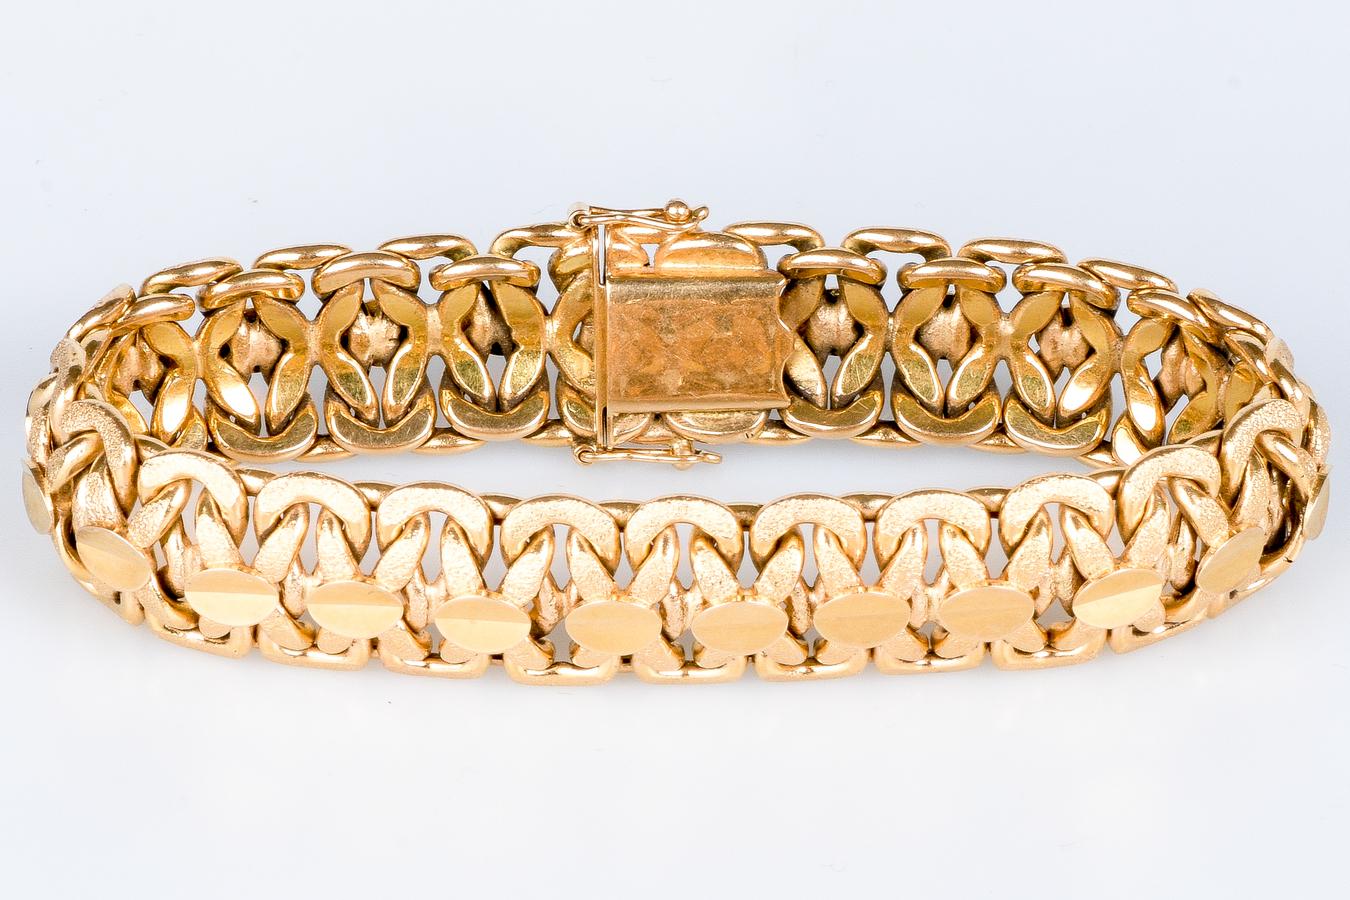 This royal mesh bracelet is a true work of art in 18-carat gold, combining elegance and sophistication. Royal mesh, with its delicately woven links, creates a rich, luxurious texture that draws the eye. Each link is carefully crafted in 18-carat